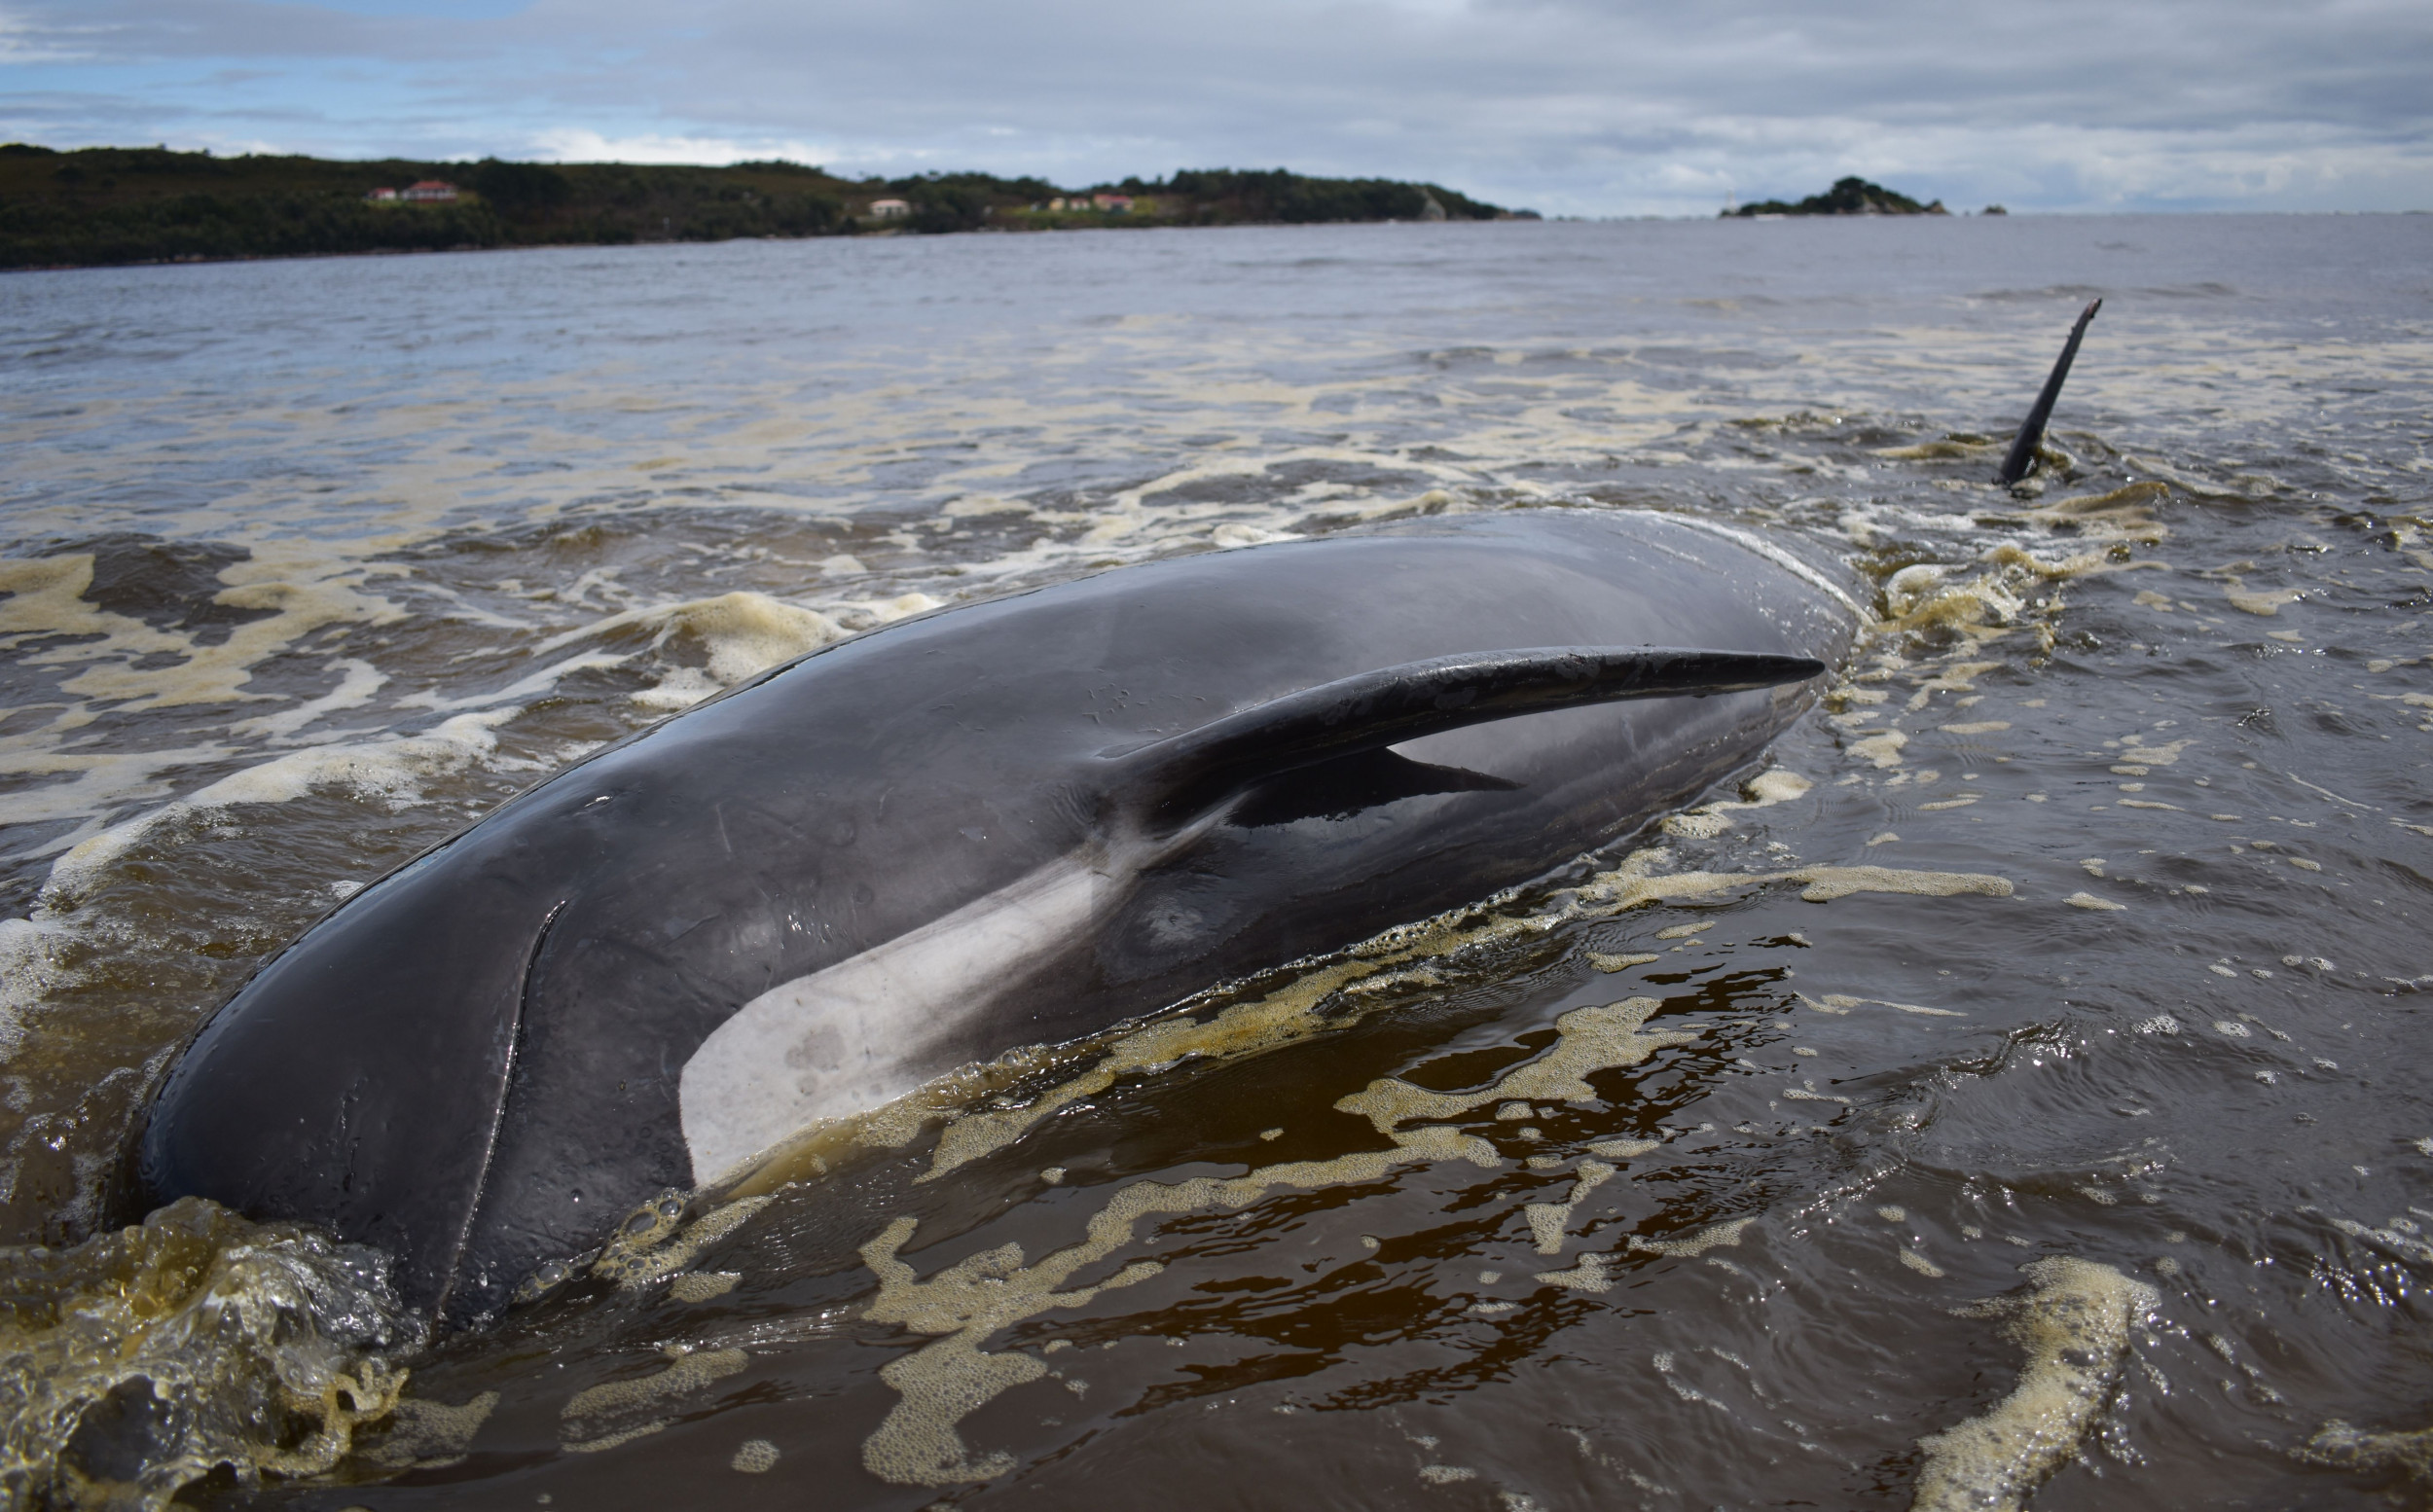 Sharks May Start Feasting on Hundreds of Dead Whales in Mass Stranding Off Tasmania, Authorities Warn thumbnail